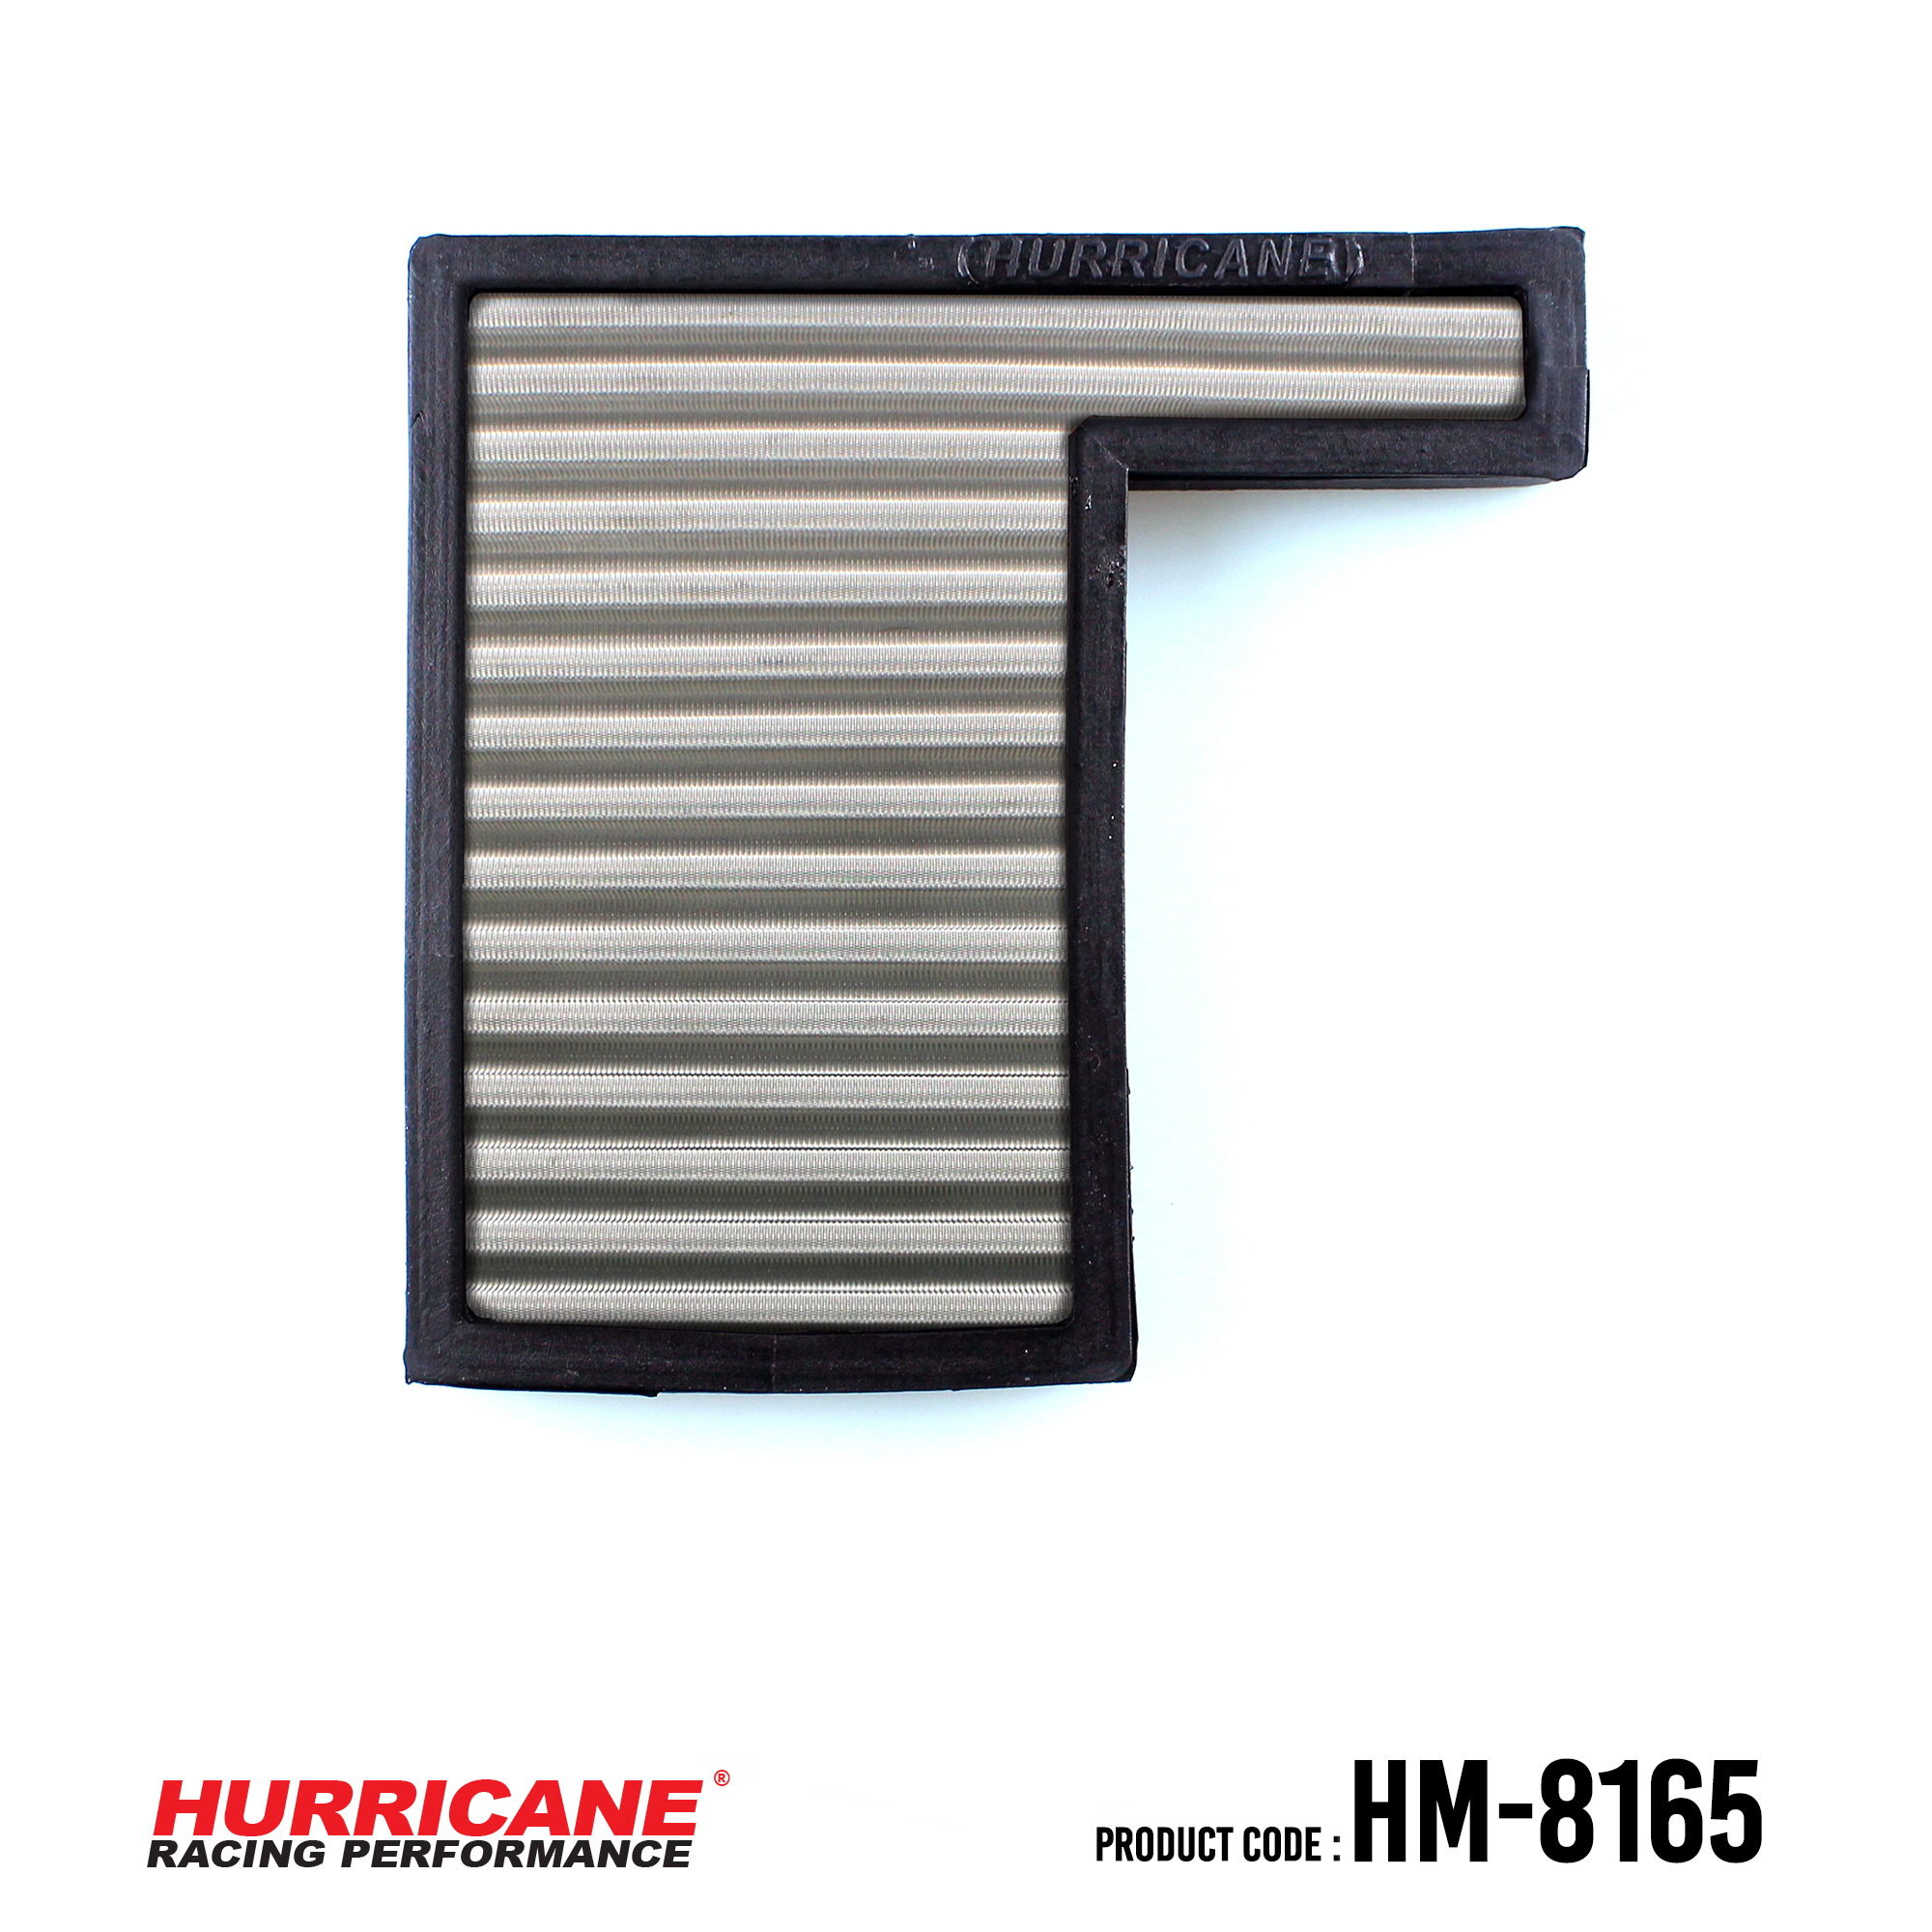 HURRICANE STAINLESS STEEL AIR FILTER FOR HM-8165 GPX